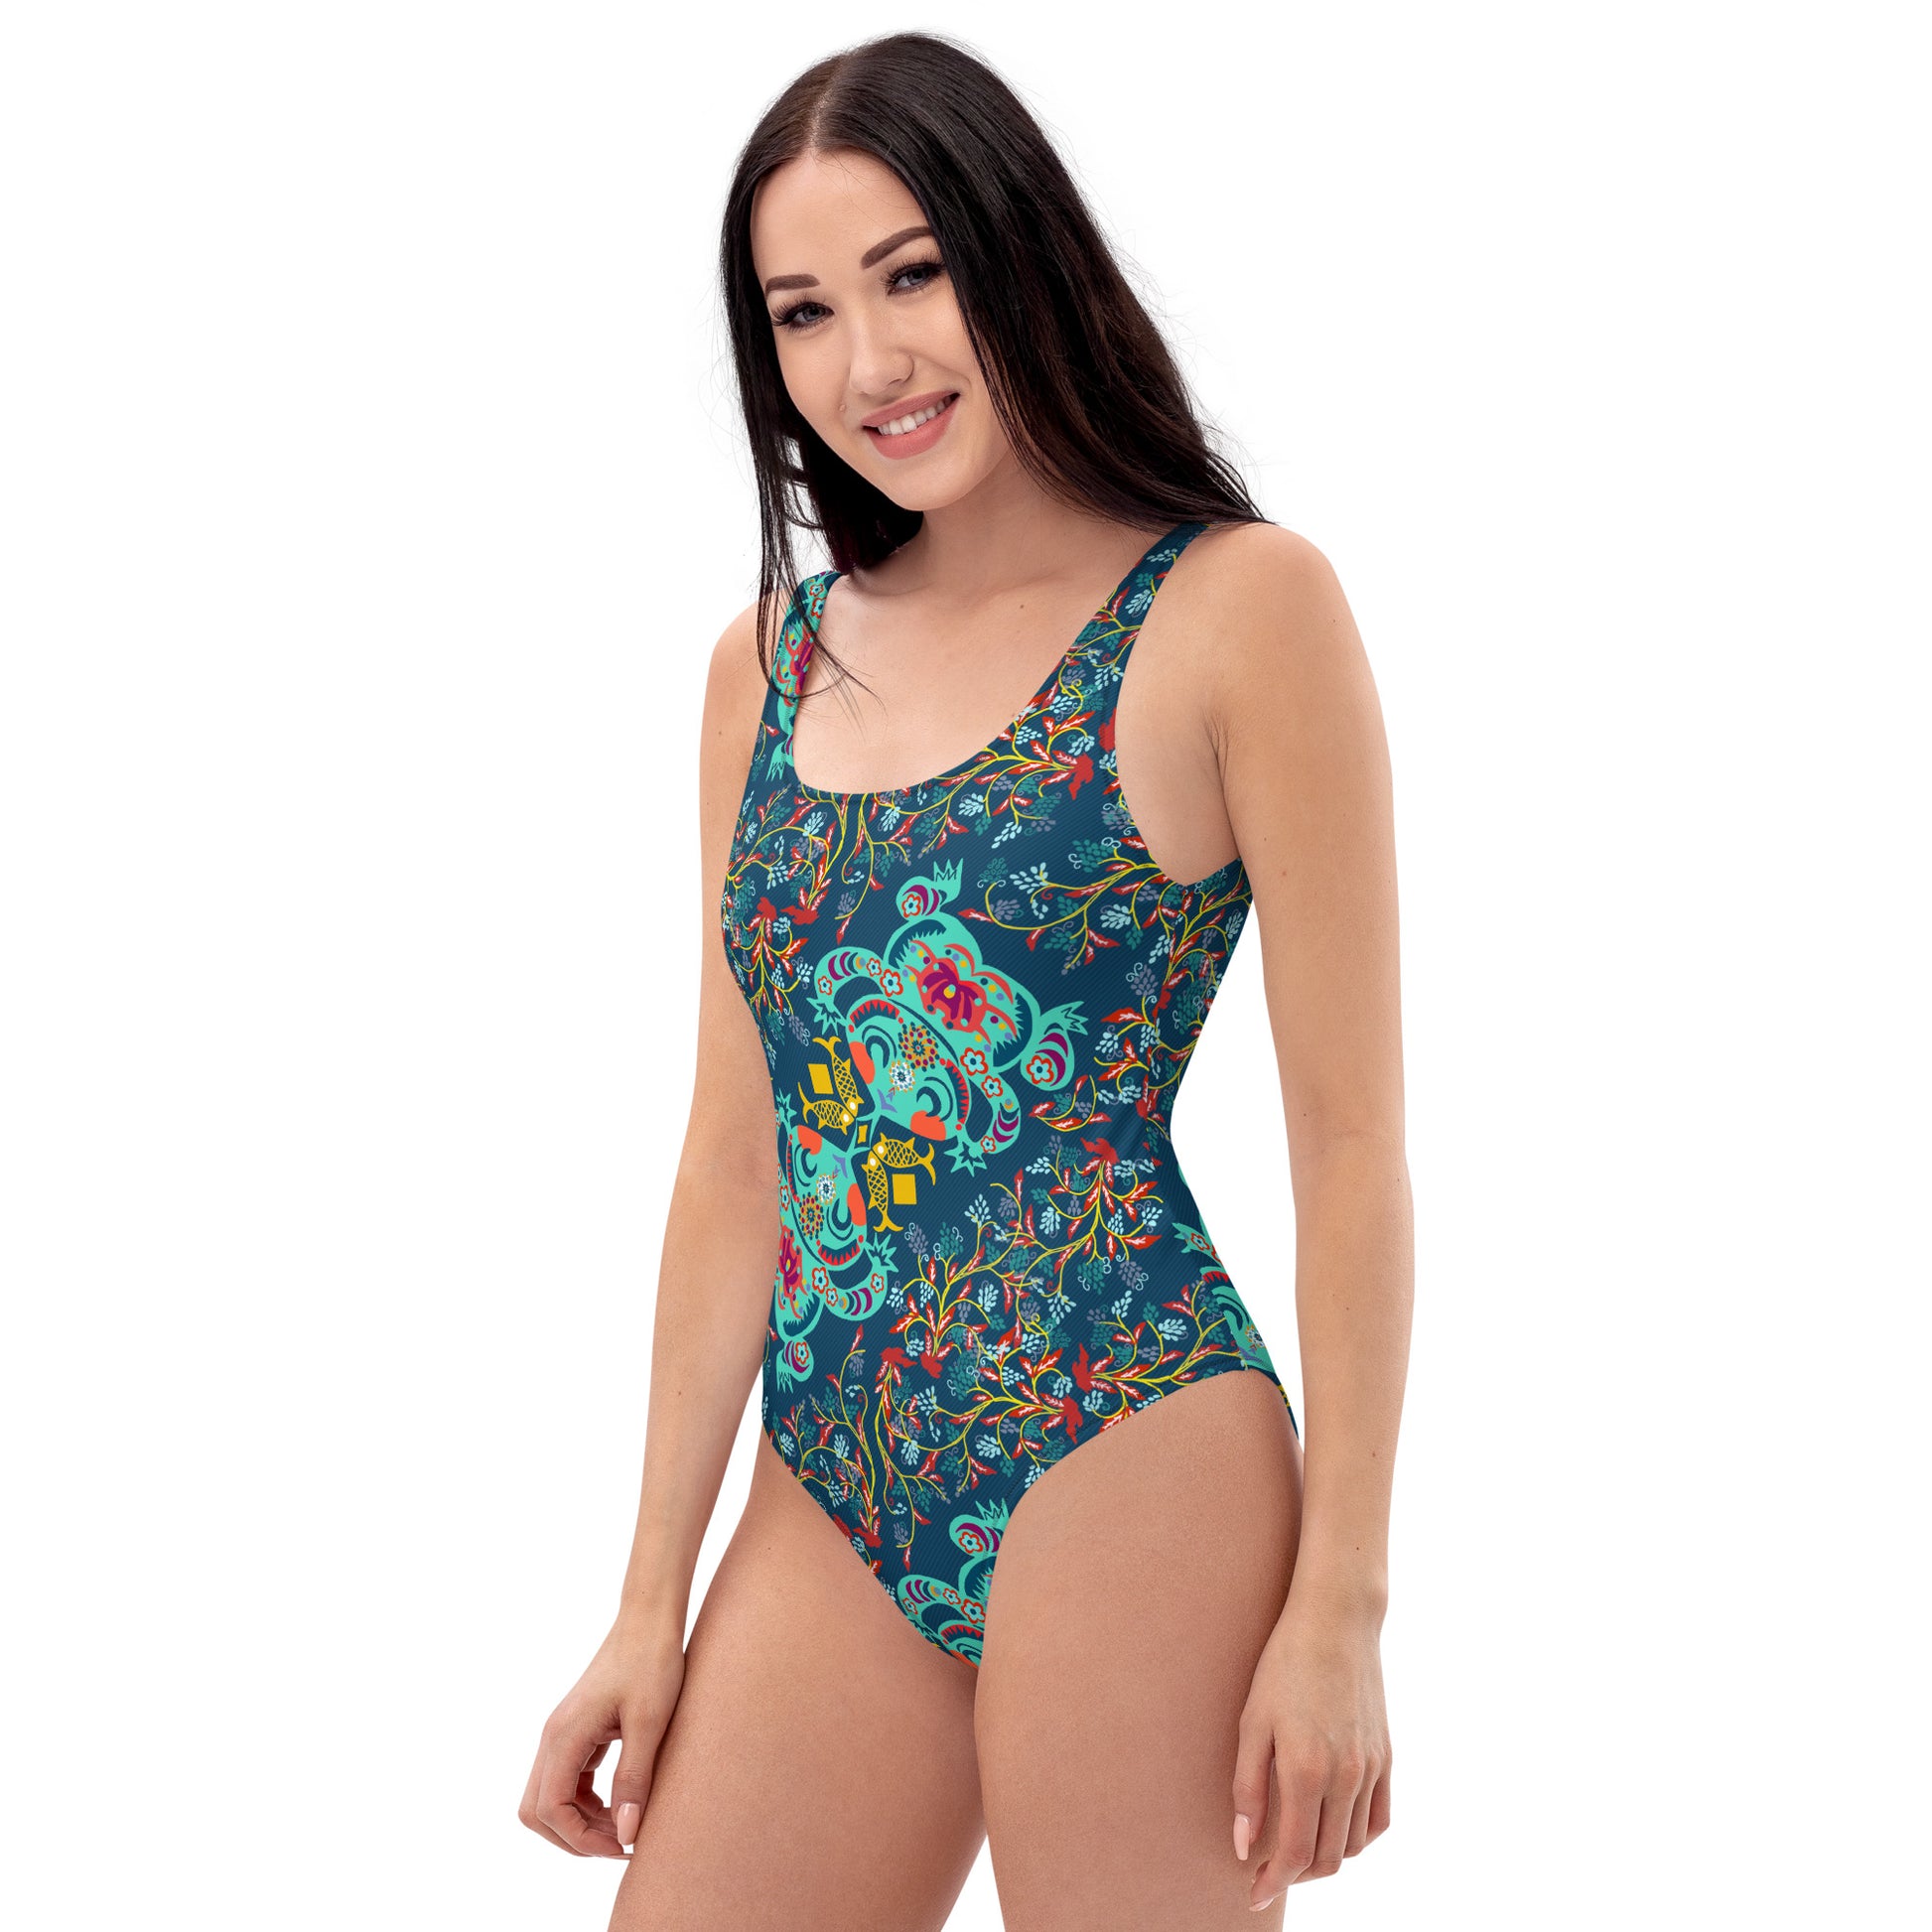 Chinese Folk Art One Piece Swimsuit - The Global Wanderer